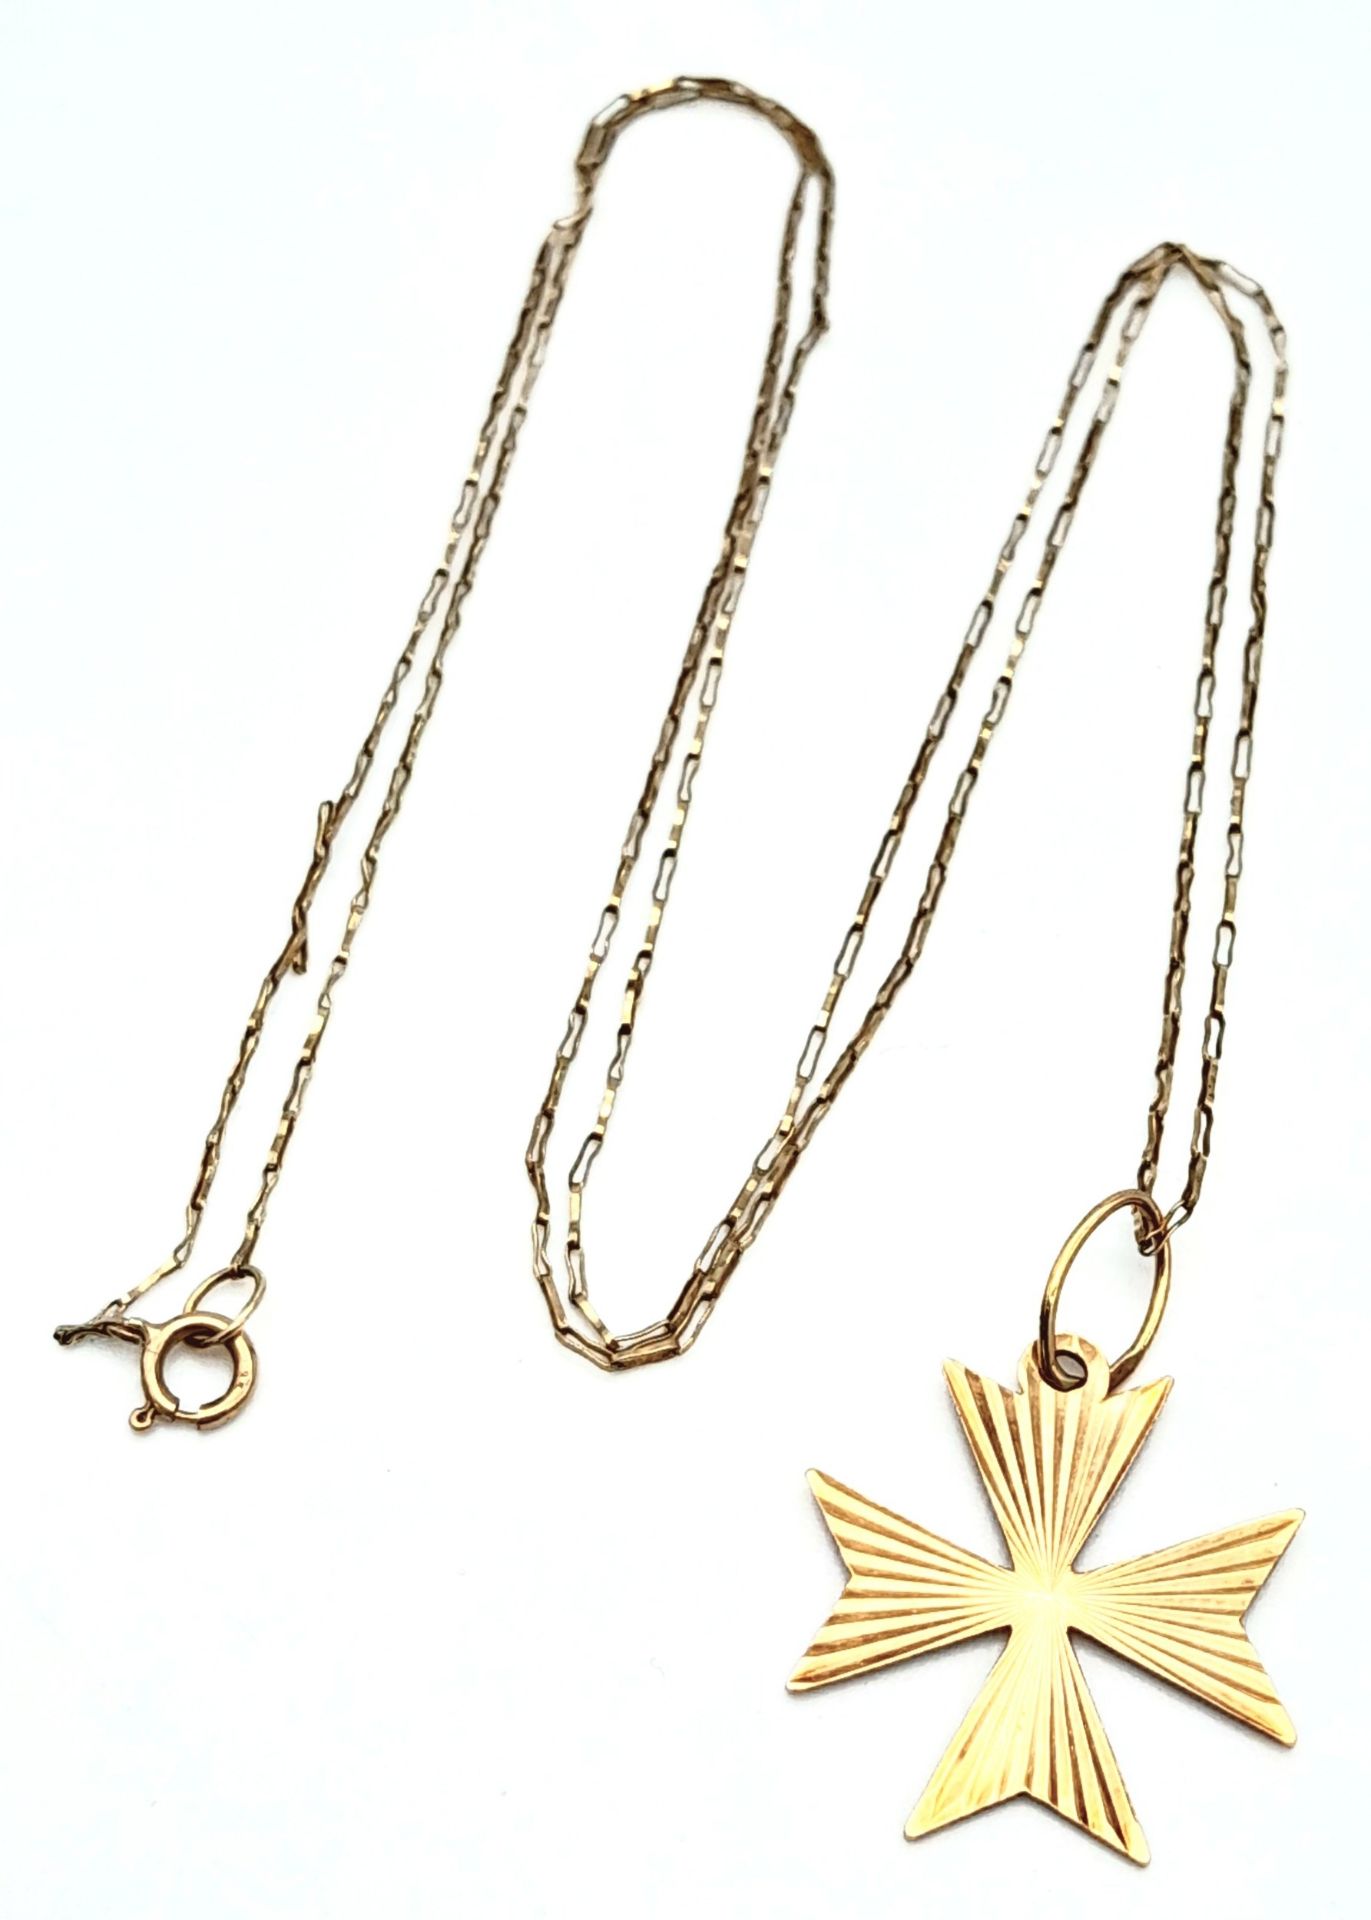 9 K yellow gold chain necklace with a Maltese cross pendant (12 x 12 mm), chain length: 51 cm, total - Image 3 of 5